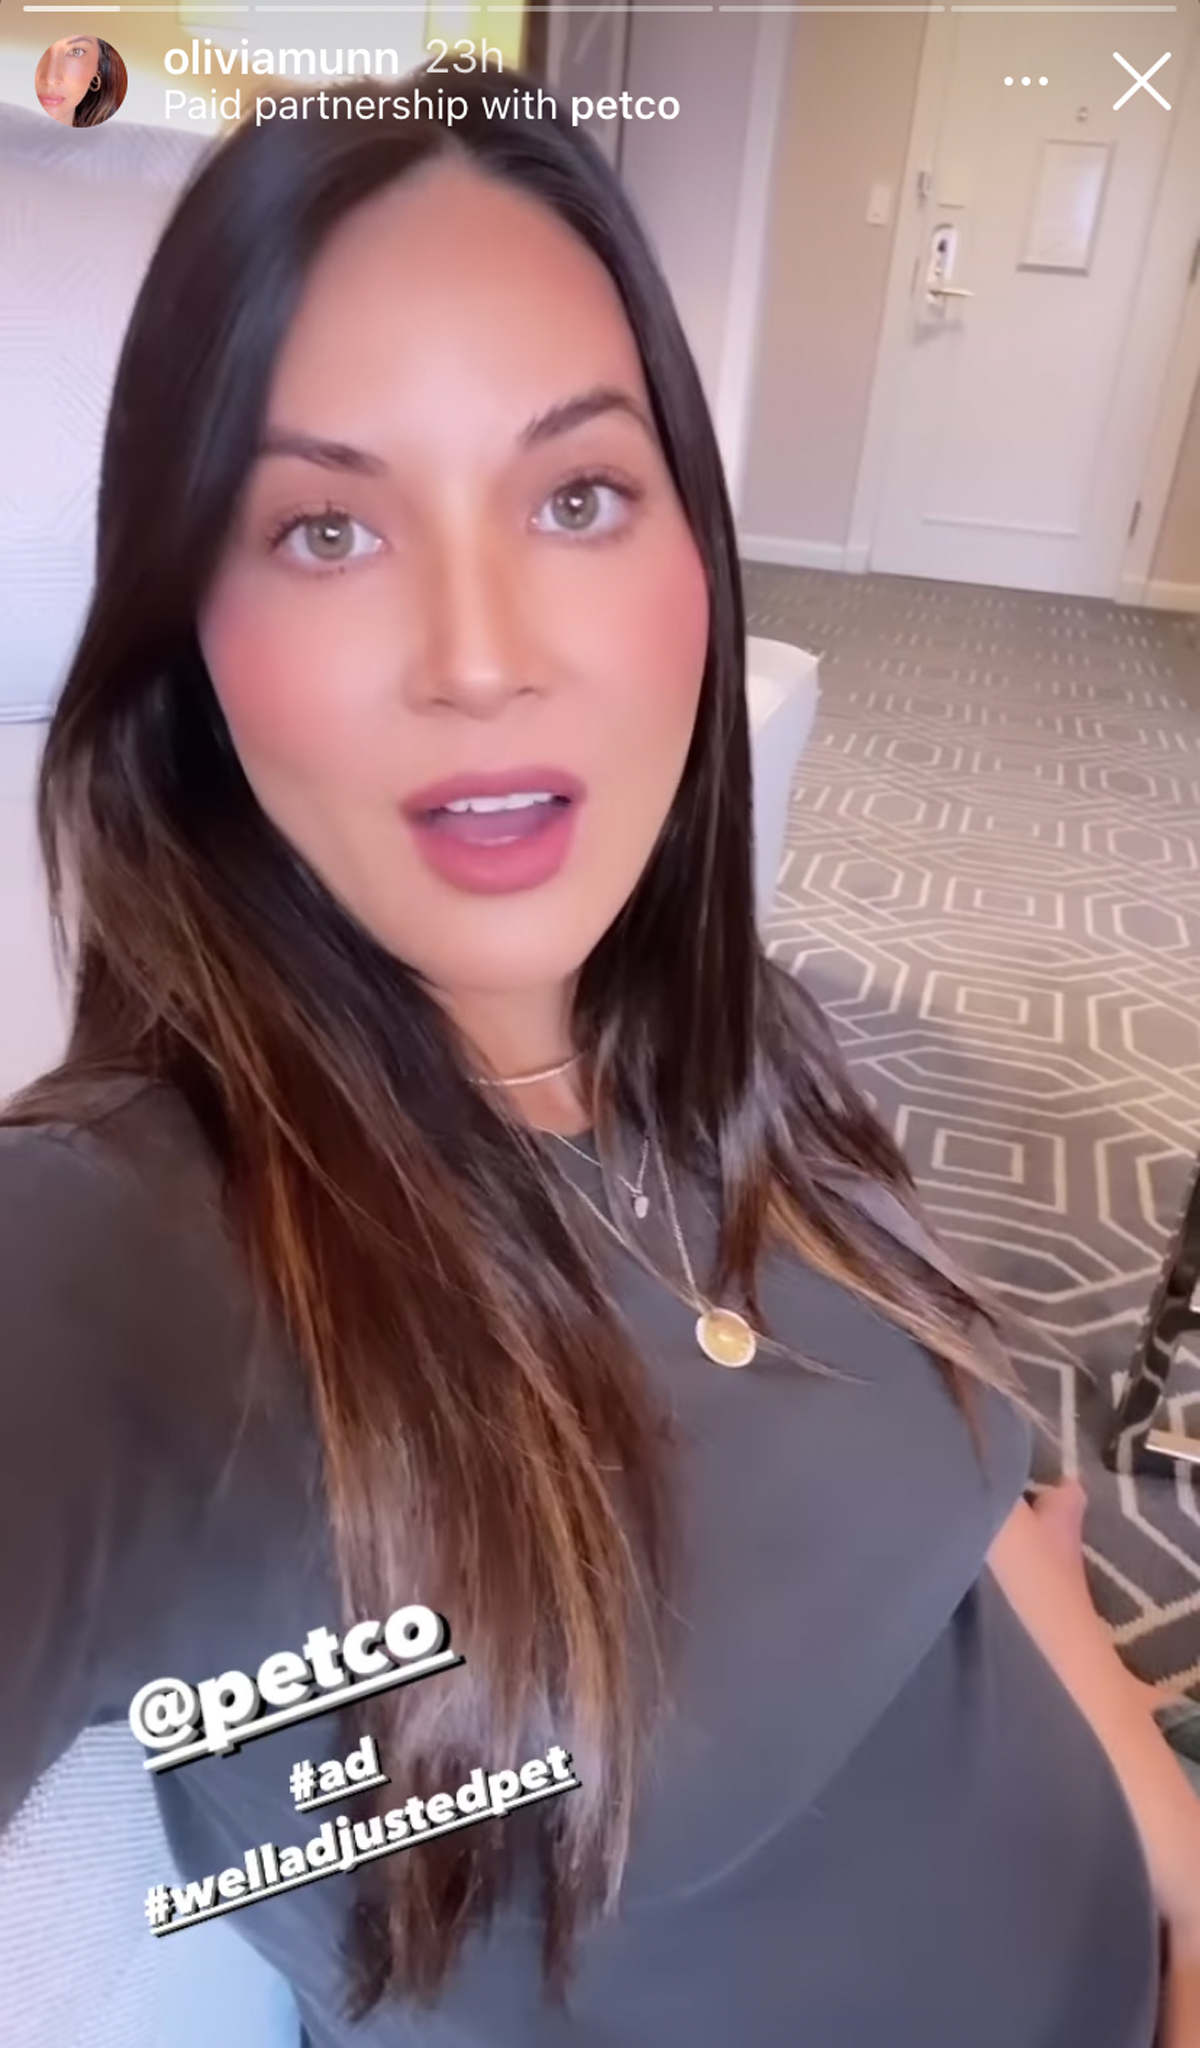 Olivia Munn Gives First Glimpse Of Her Baby Bump On Instagram!